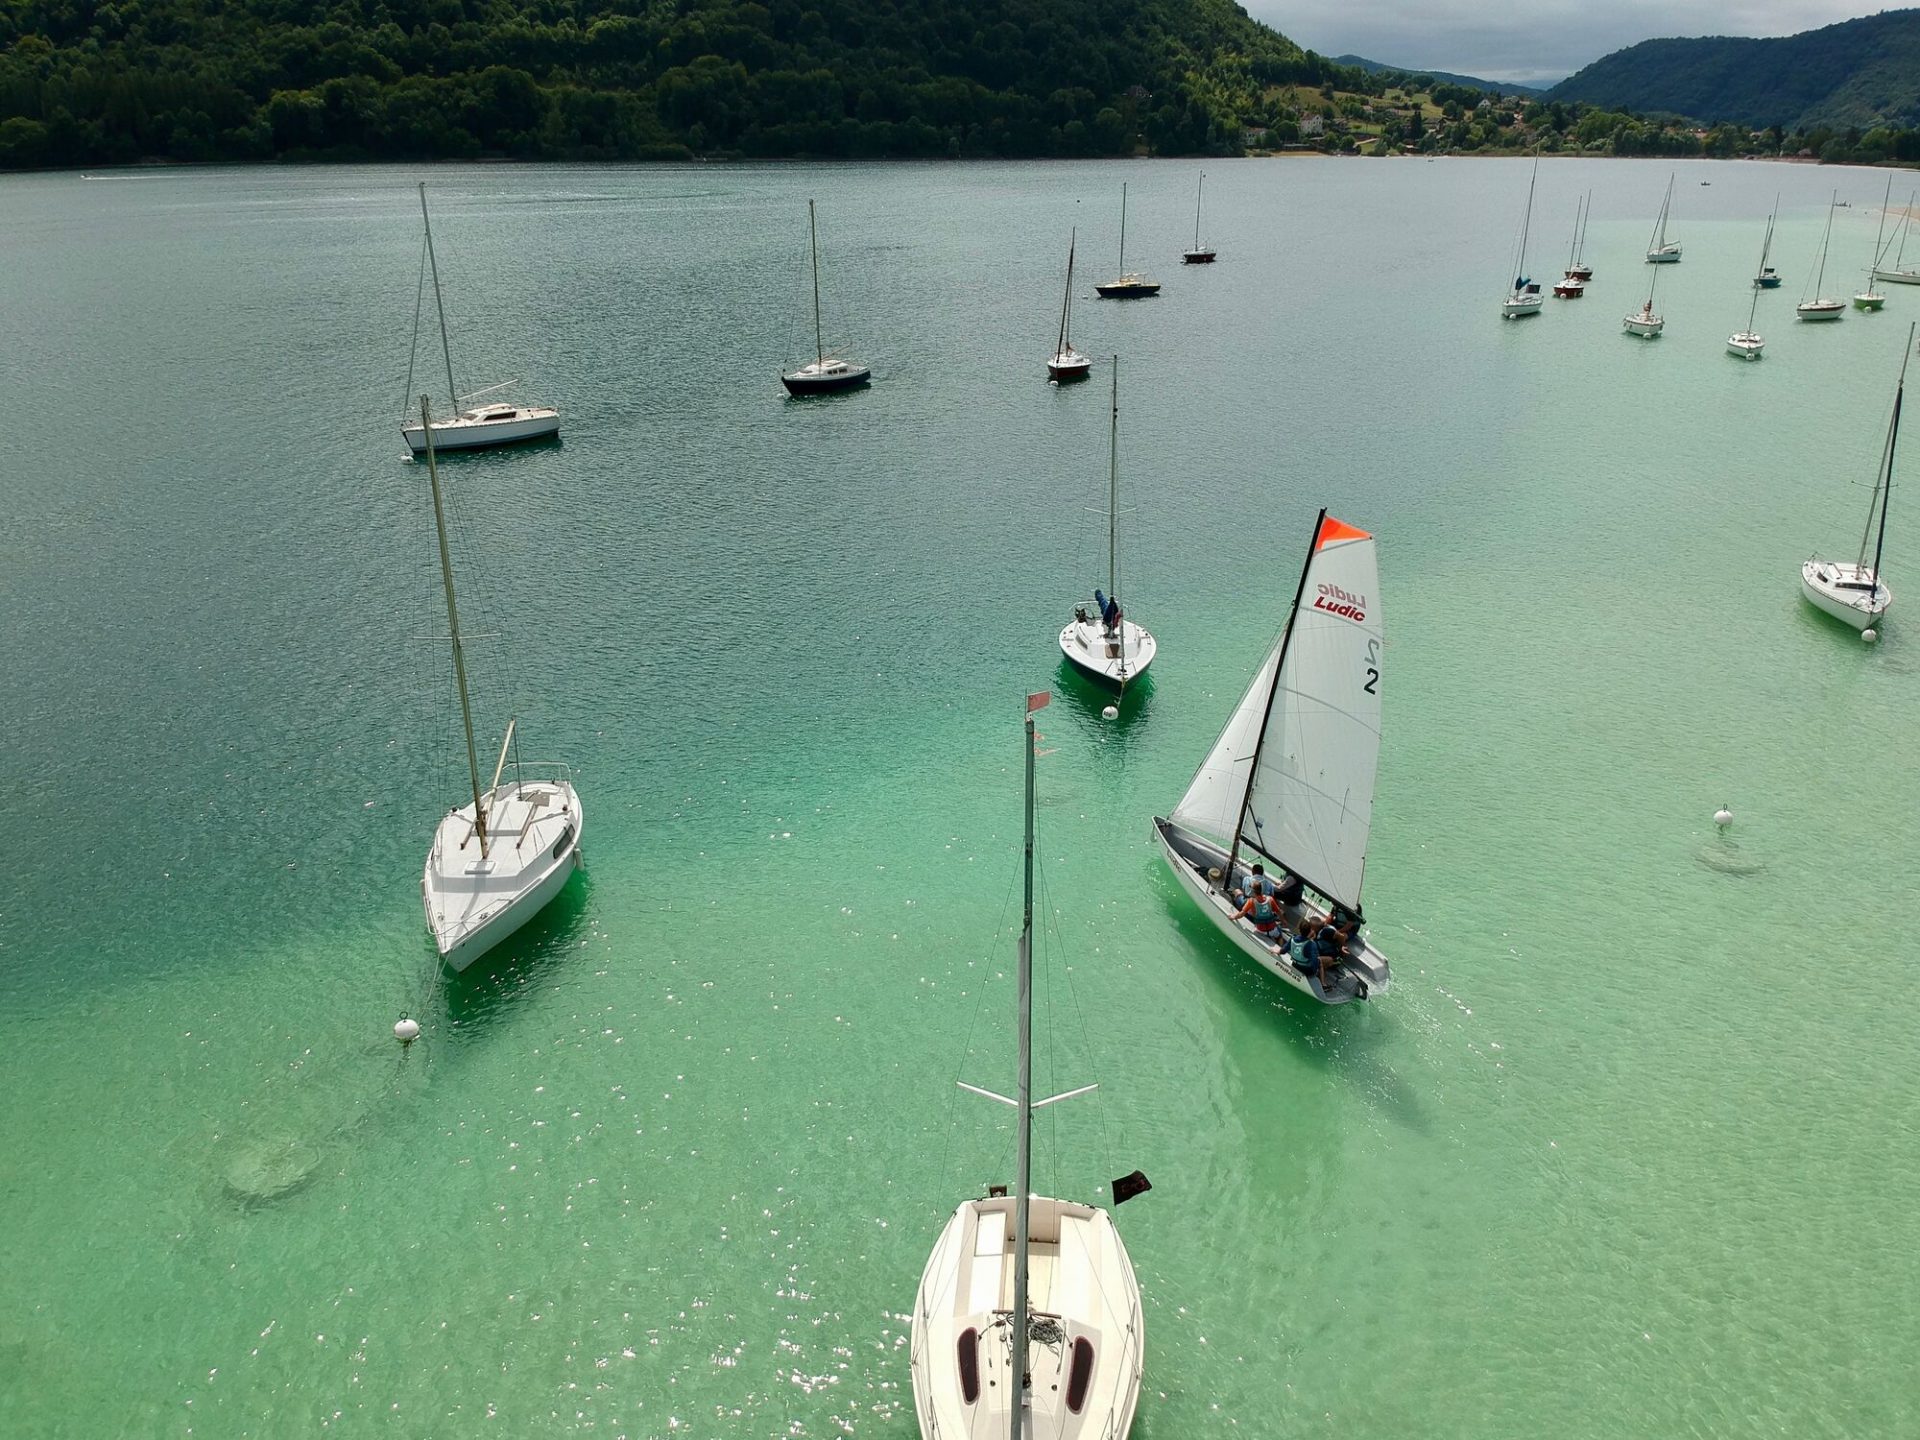 Lac de Paladru drone view turquoise waters boats